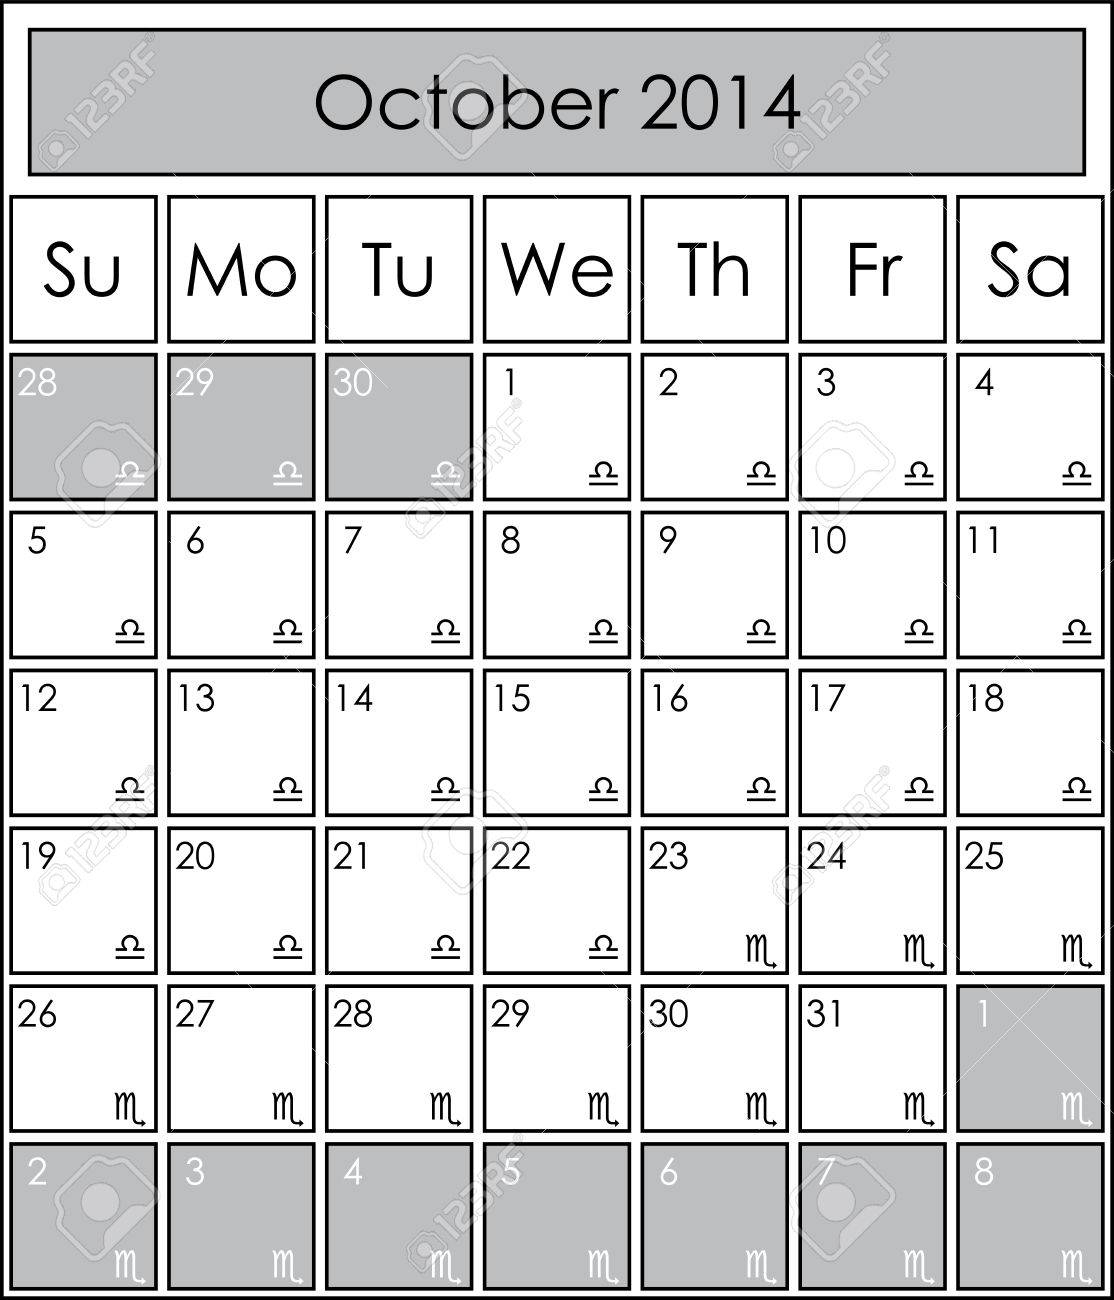 2014 Calendar Monthly, October, With Zodiac Signs